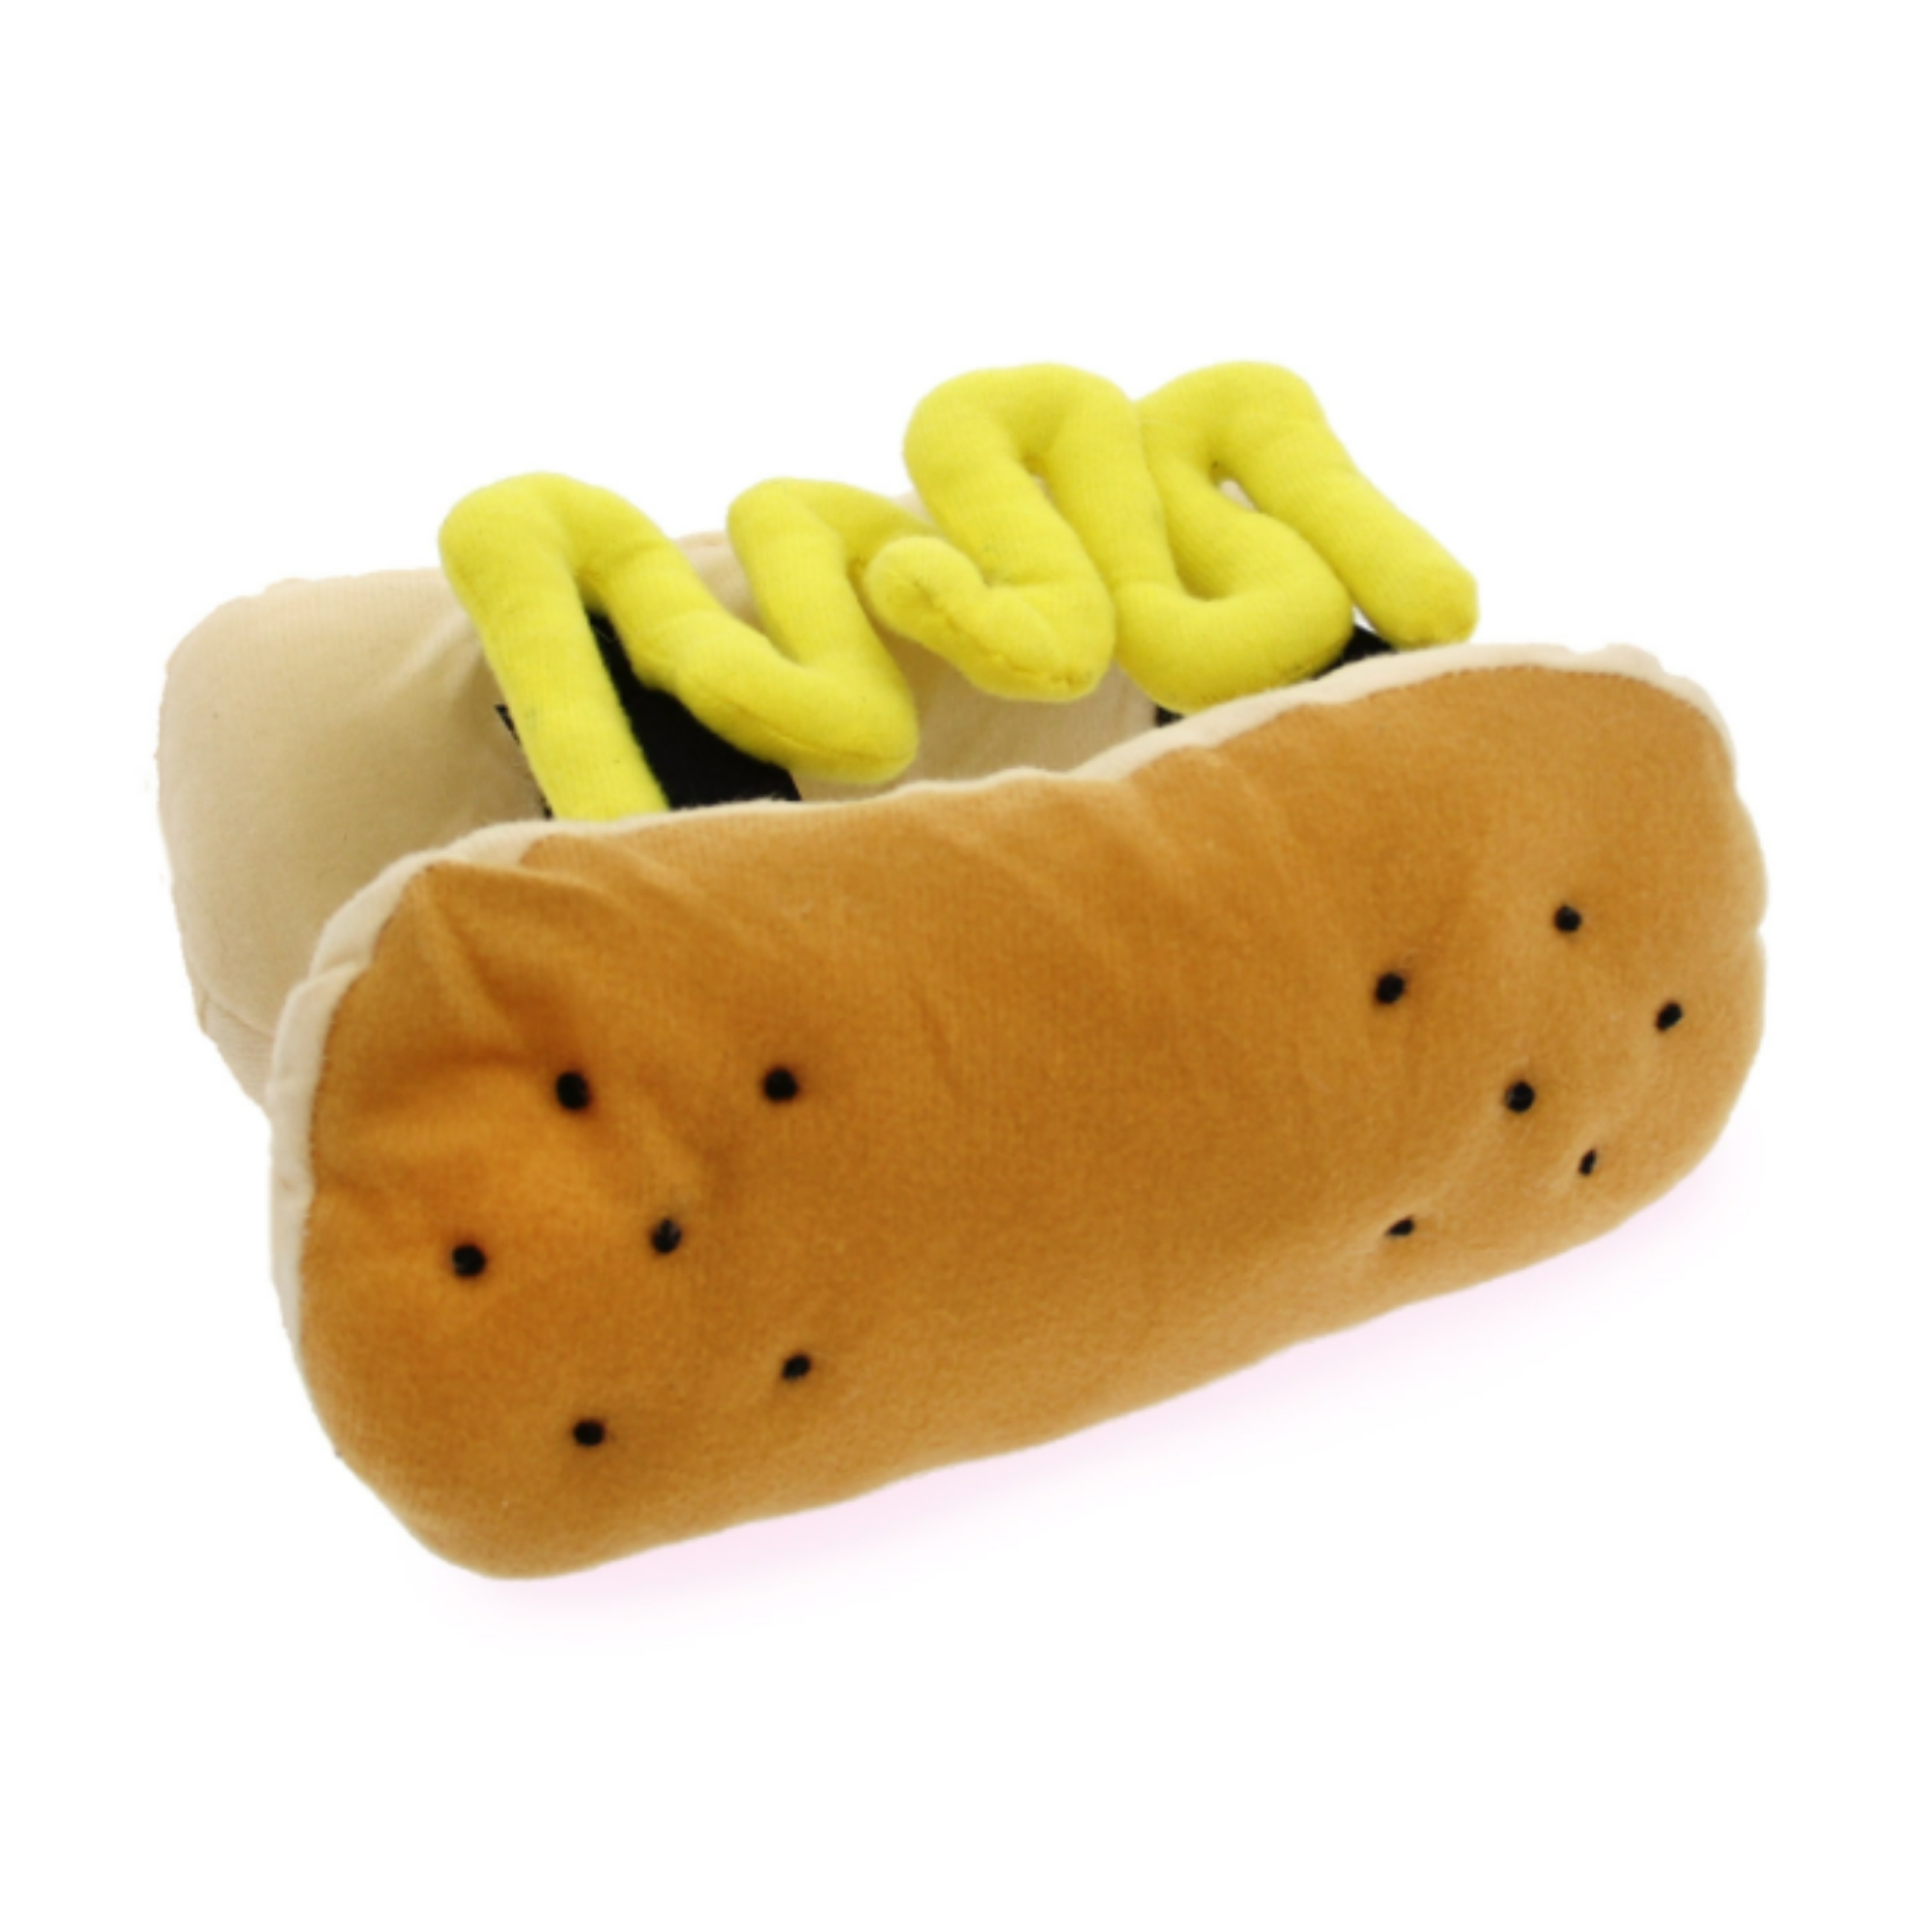 Casual Canine Hot Diggity Dog with Mustard Costume for Dogs, 14" Small/Medium - image 2 of 3